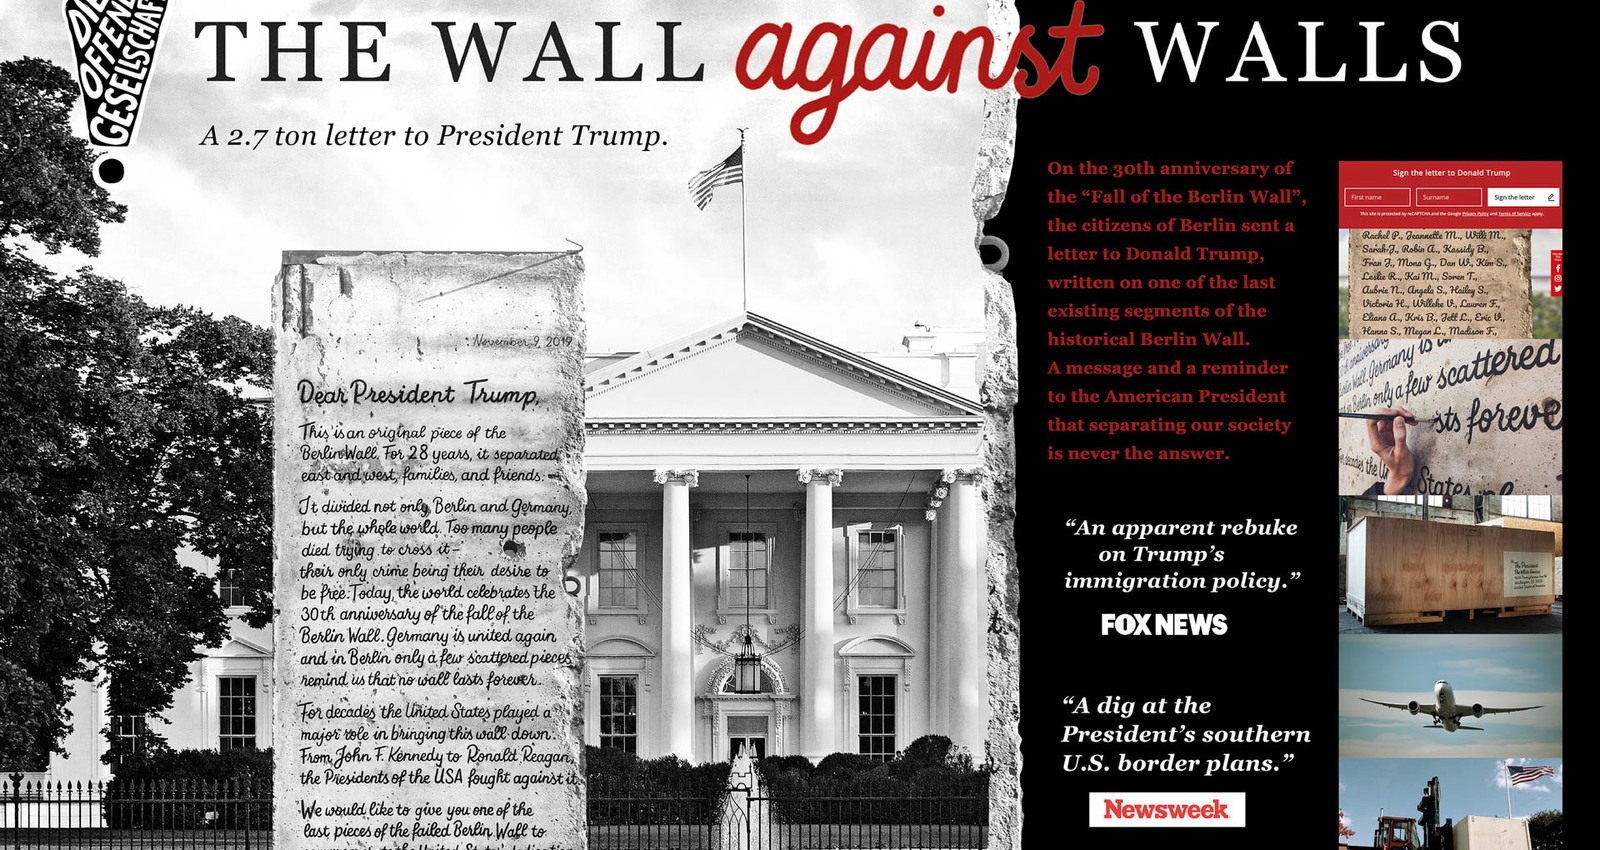 The Wall against Walls